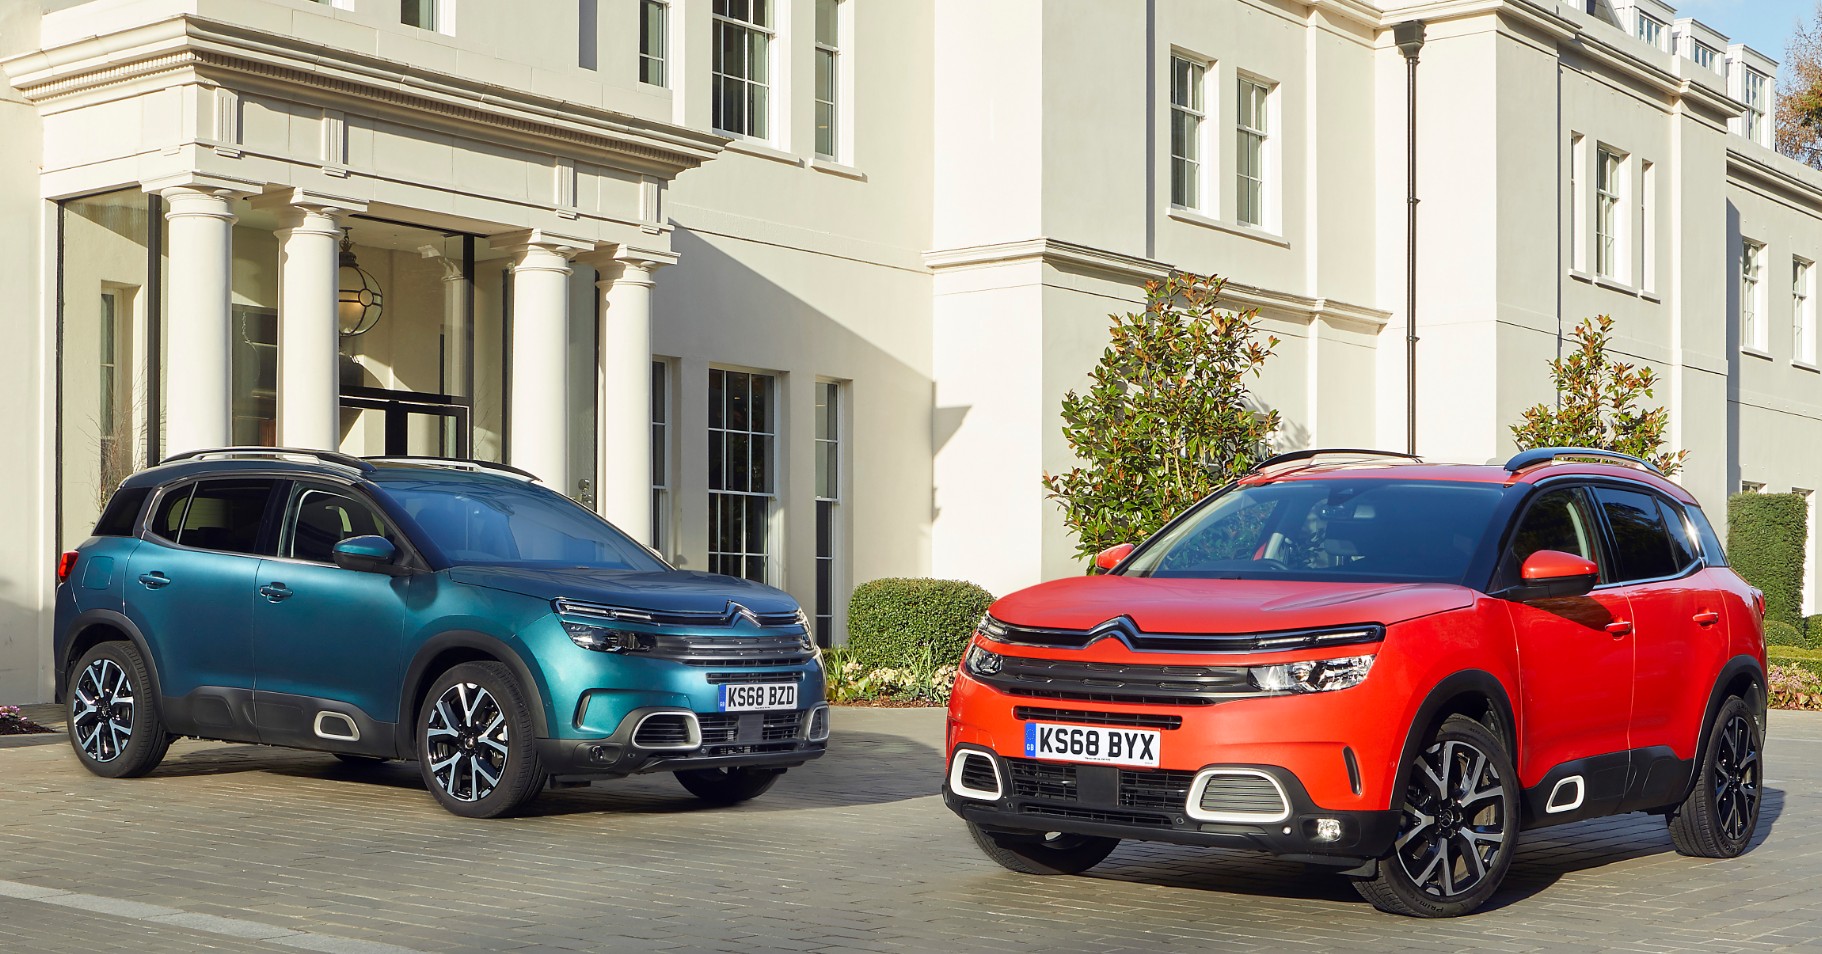 Funky looks of the Citroen C5 Aircross - a blend of fun and practicality for a range of fleet drivers